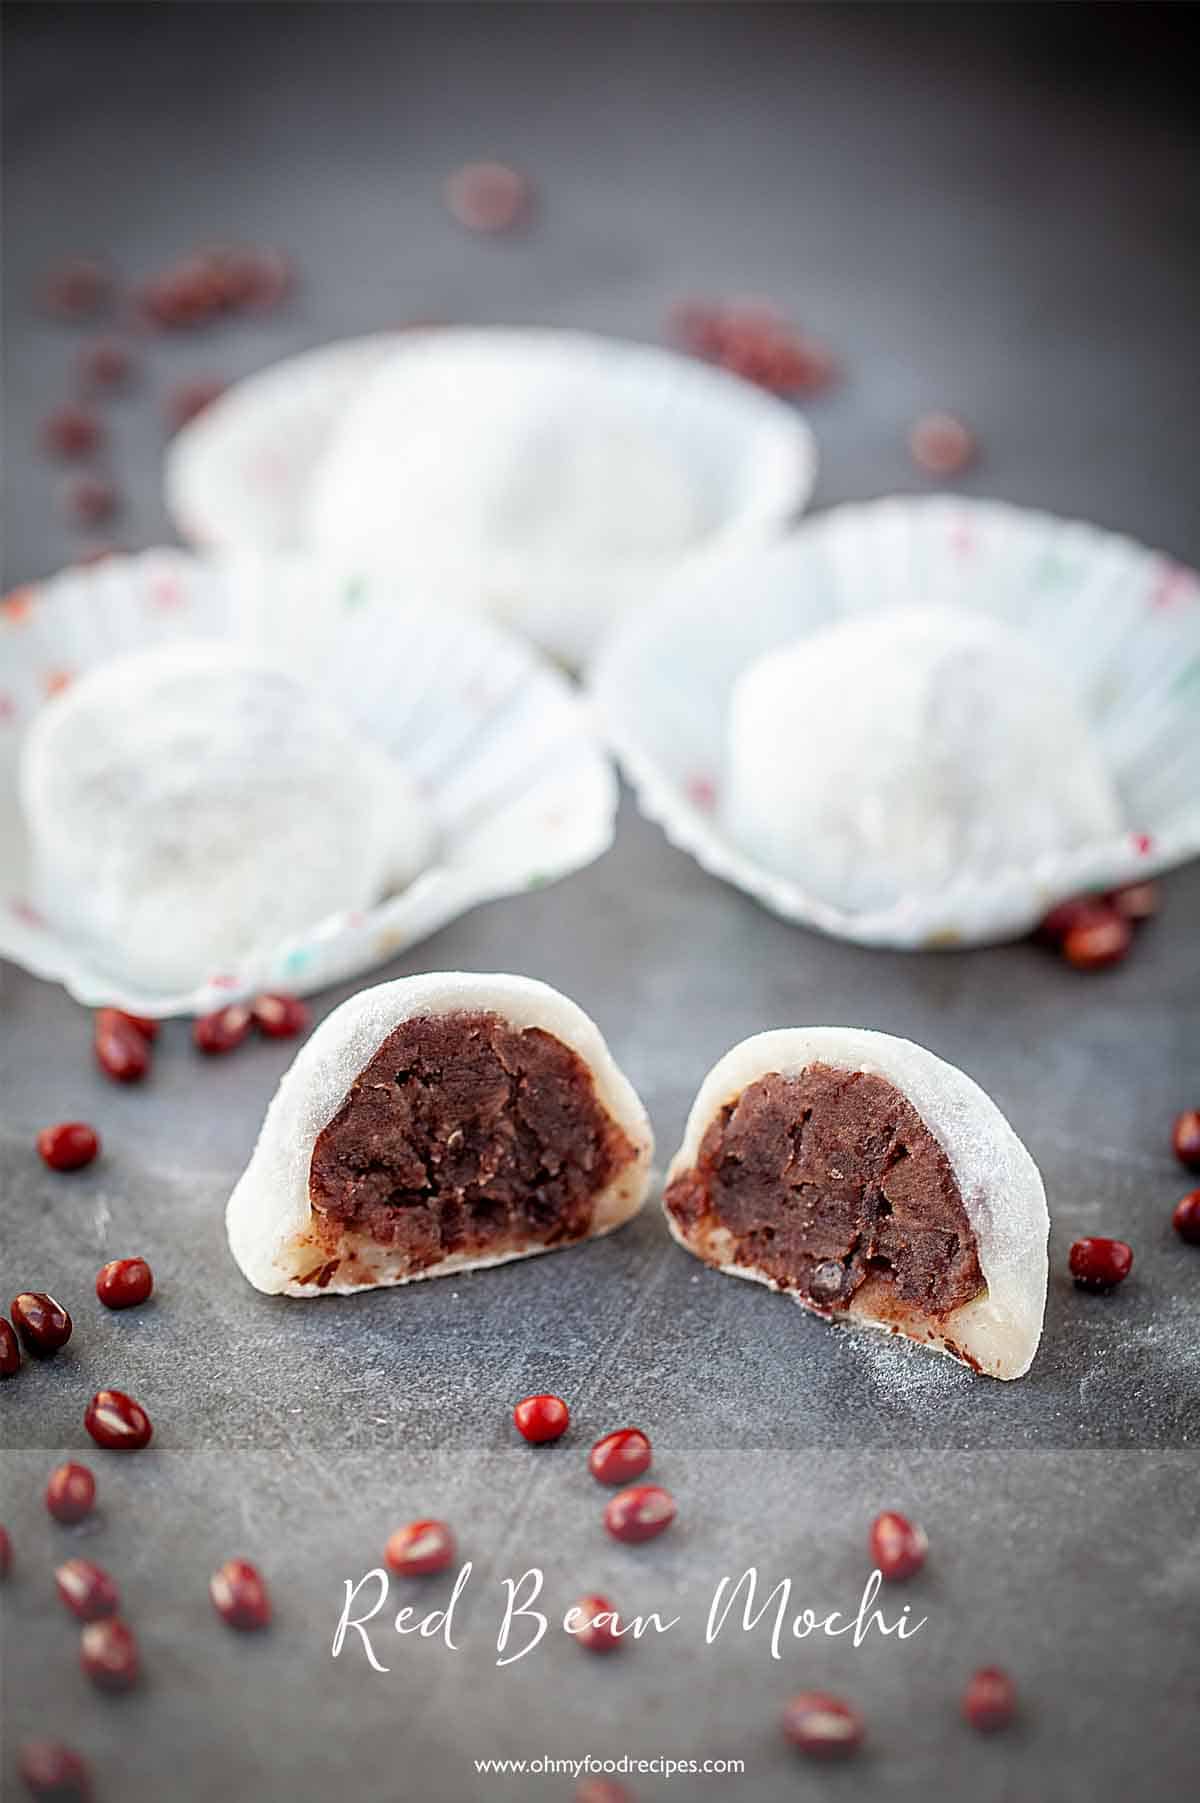 A red bean mochi cut in half on a black surface with more in the background and dried red beans sprinkled around.